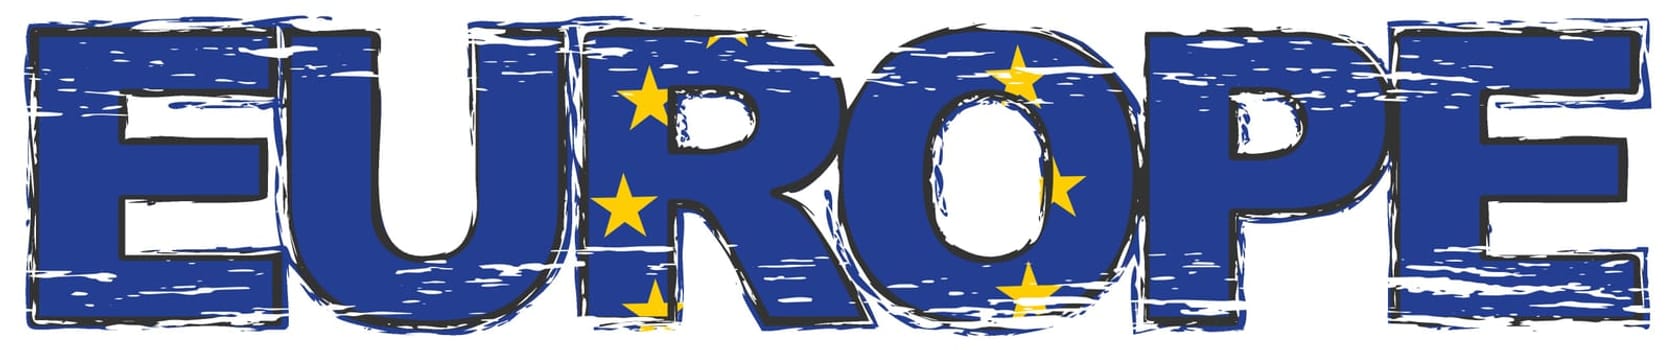 Word EUROPE with EU flag under it, distressed grunge look.